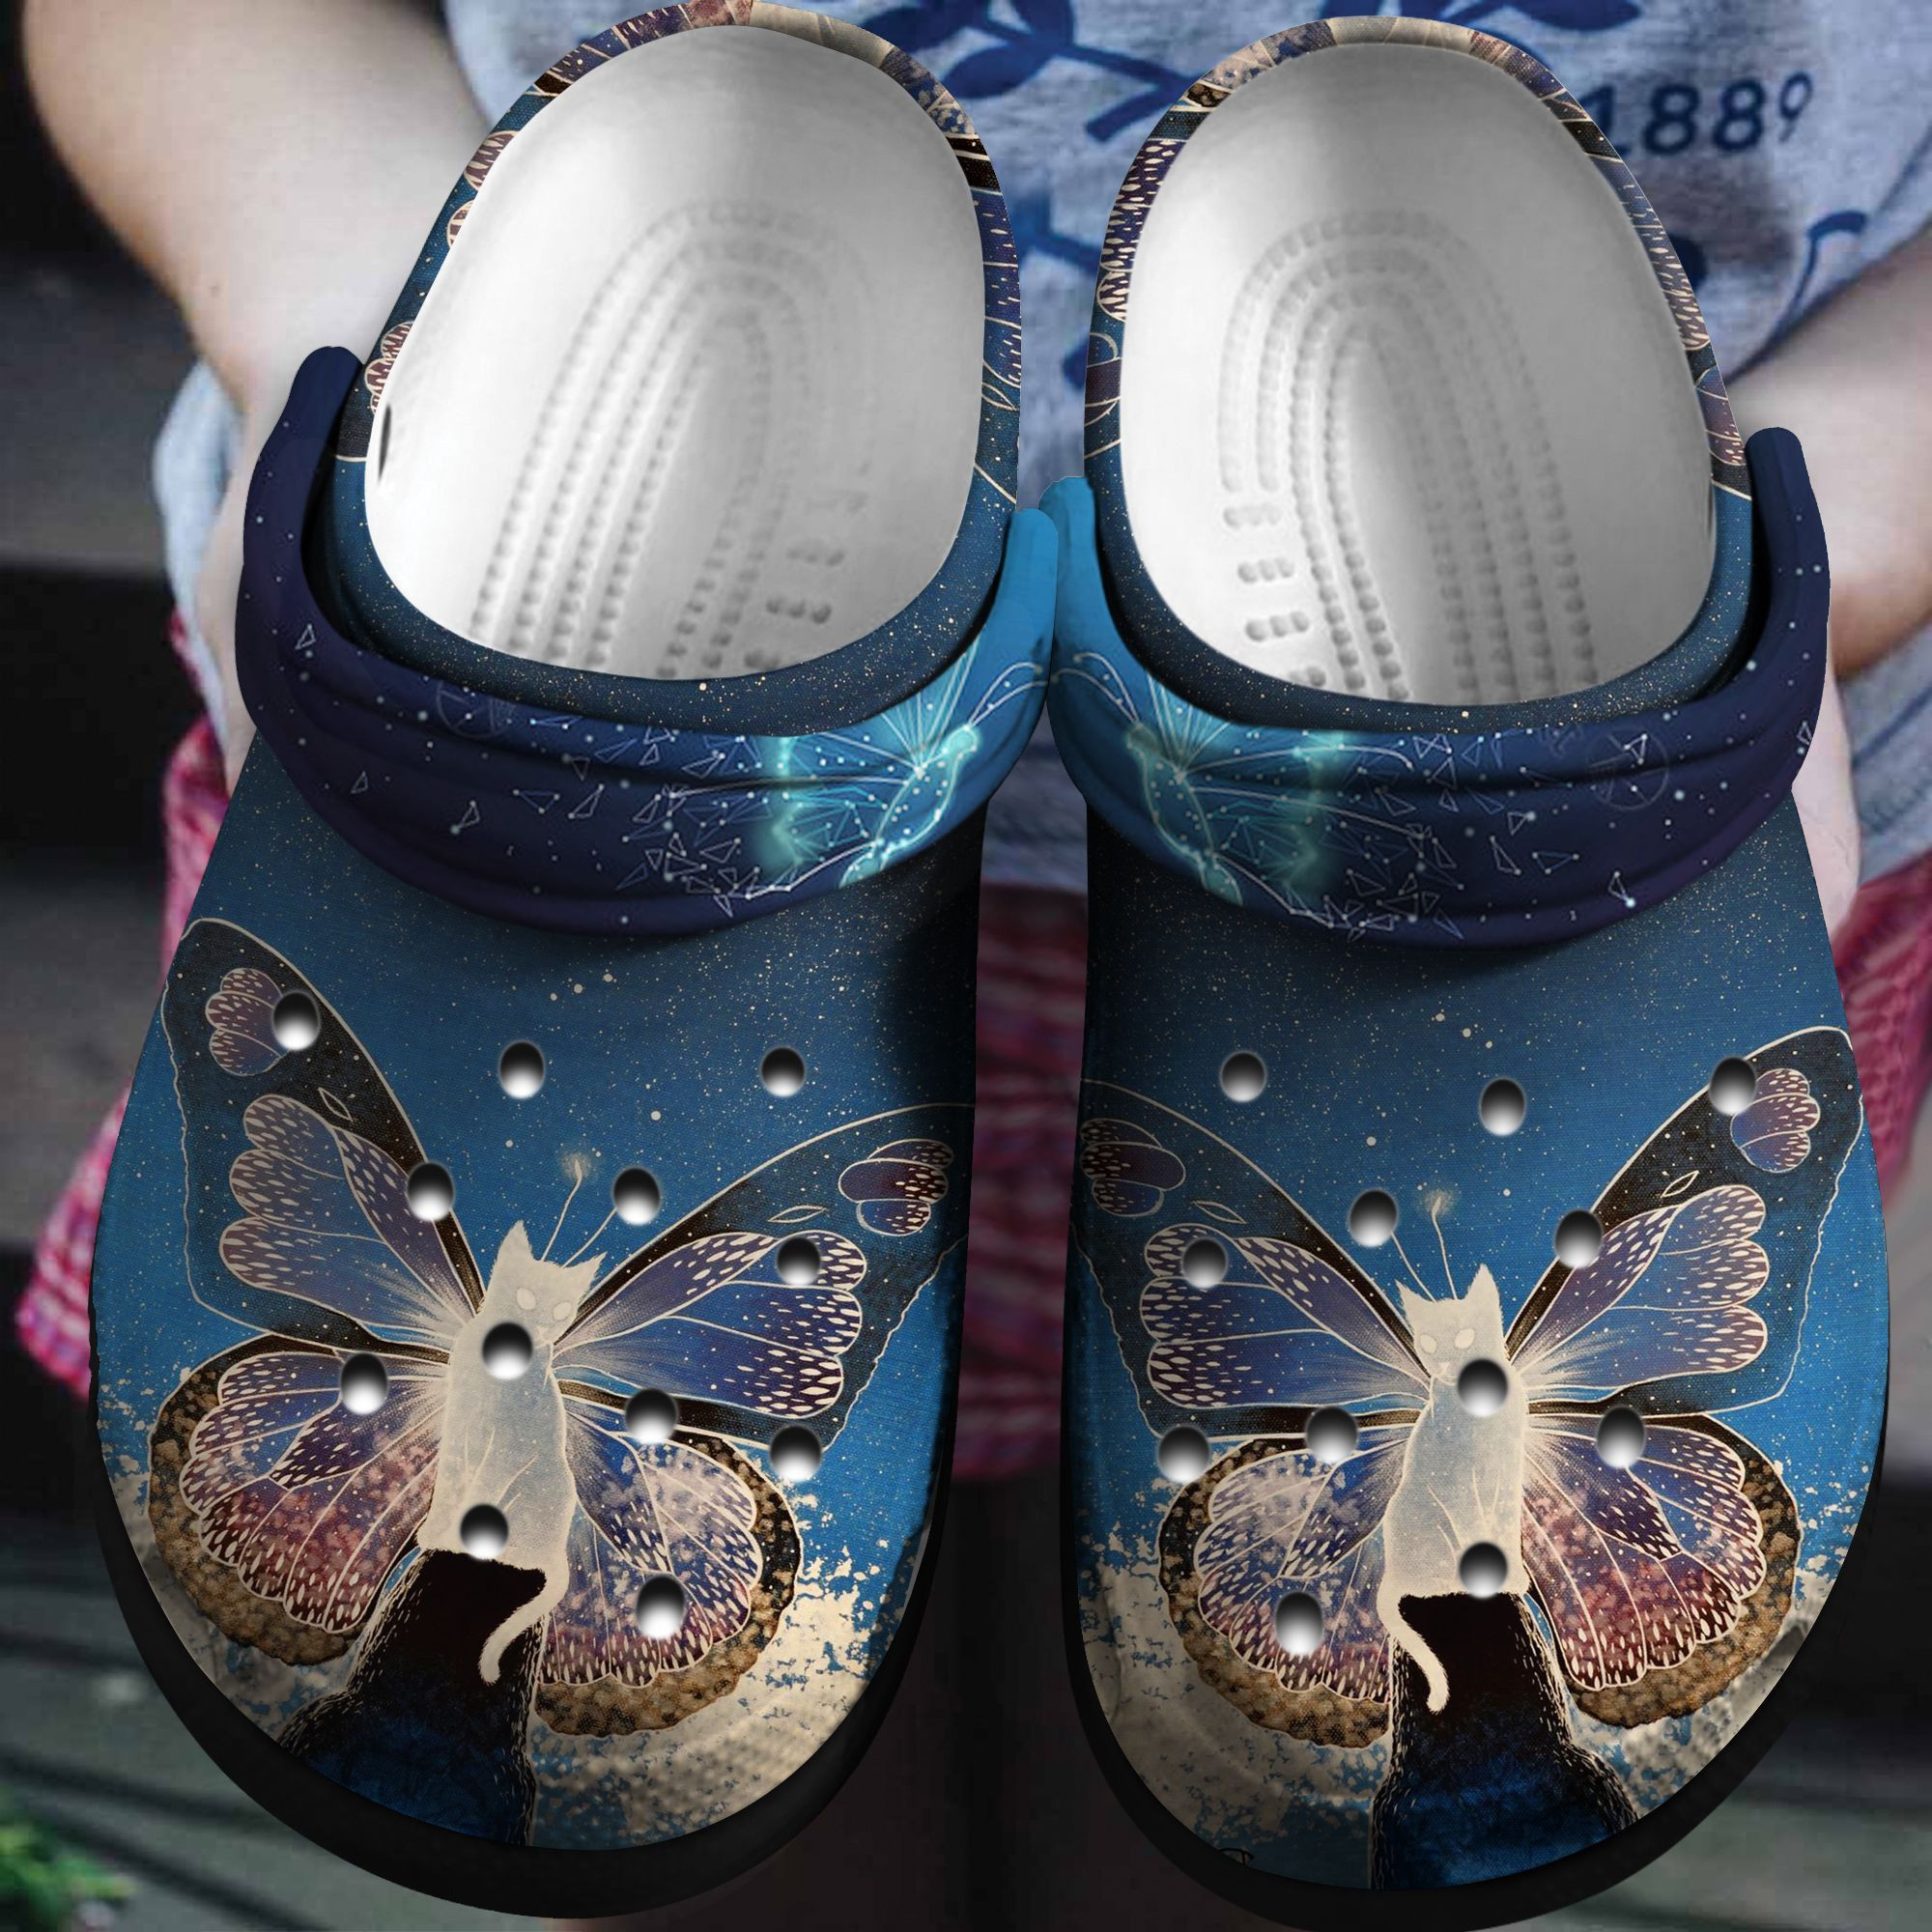 Miracle Butterfly Cat Crocs Shoes Magical Animal Crocbland Clog